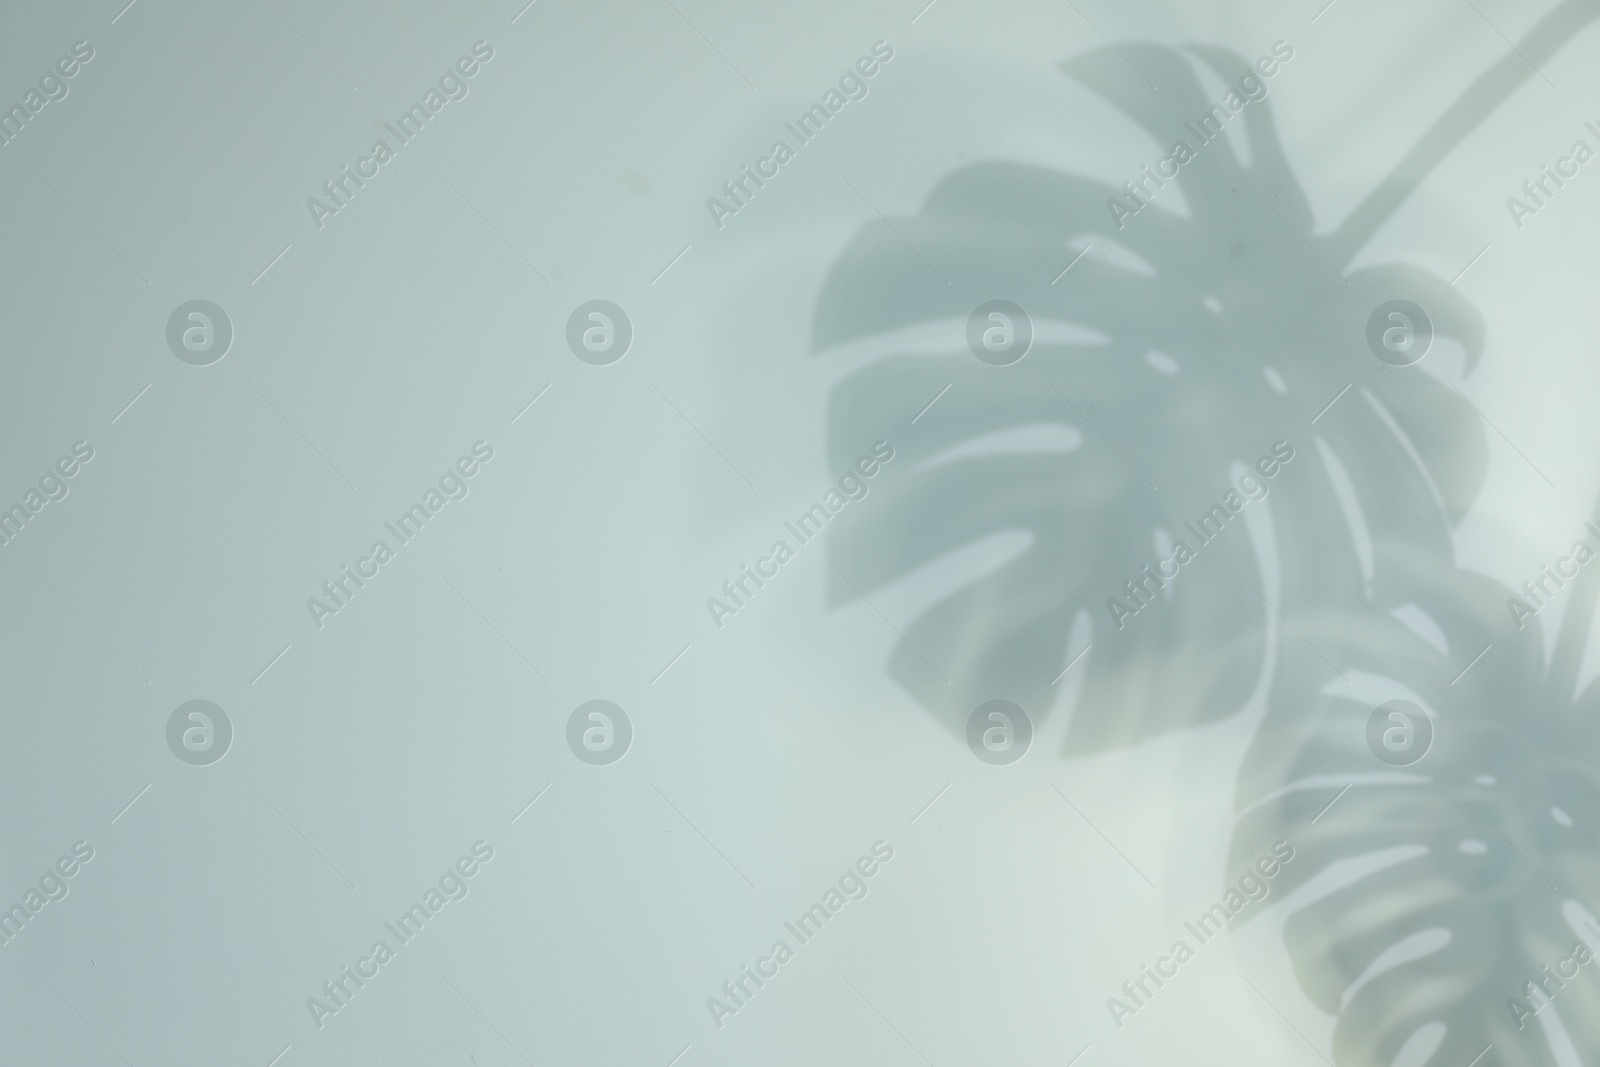 Photo of Shadow of monstera plant leaves on light background, space for text